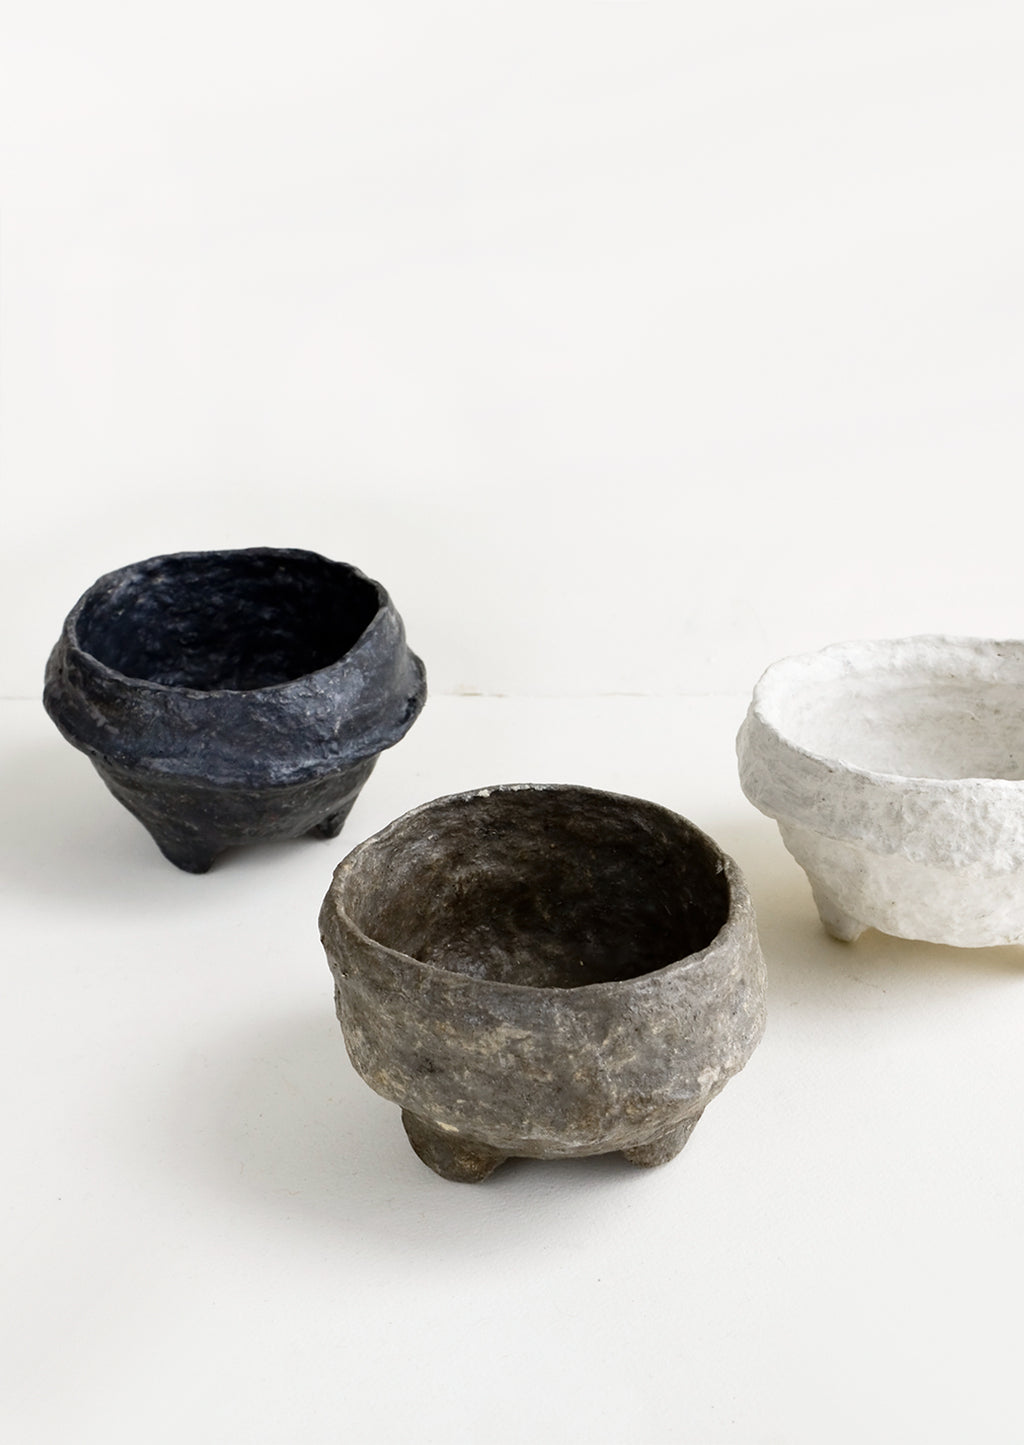 4: Small, decorative footed bowls made from paper mache in either white, black or brown